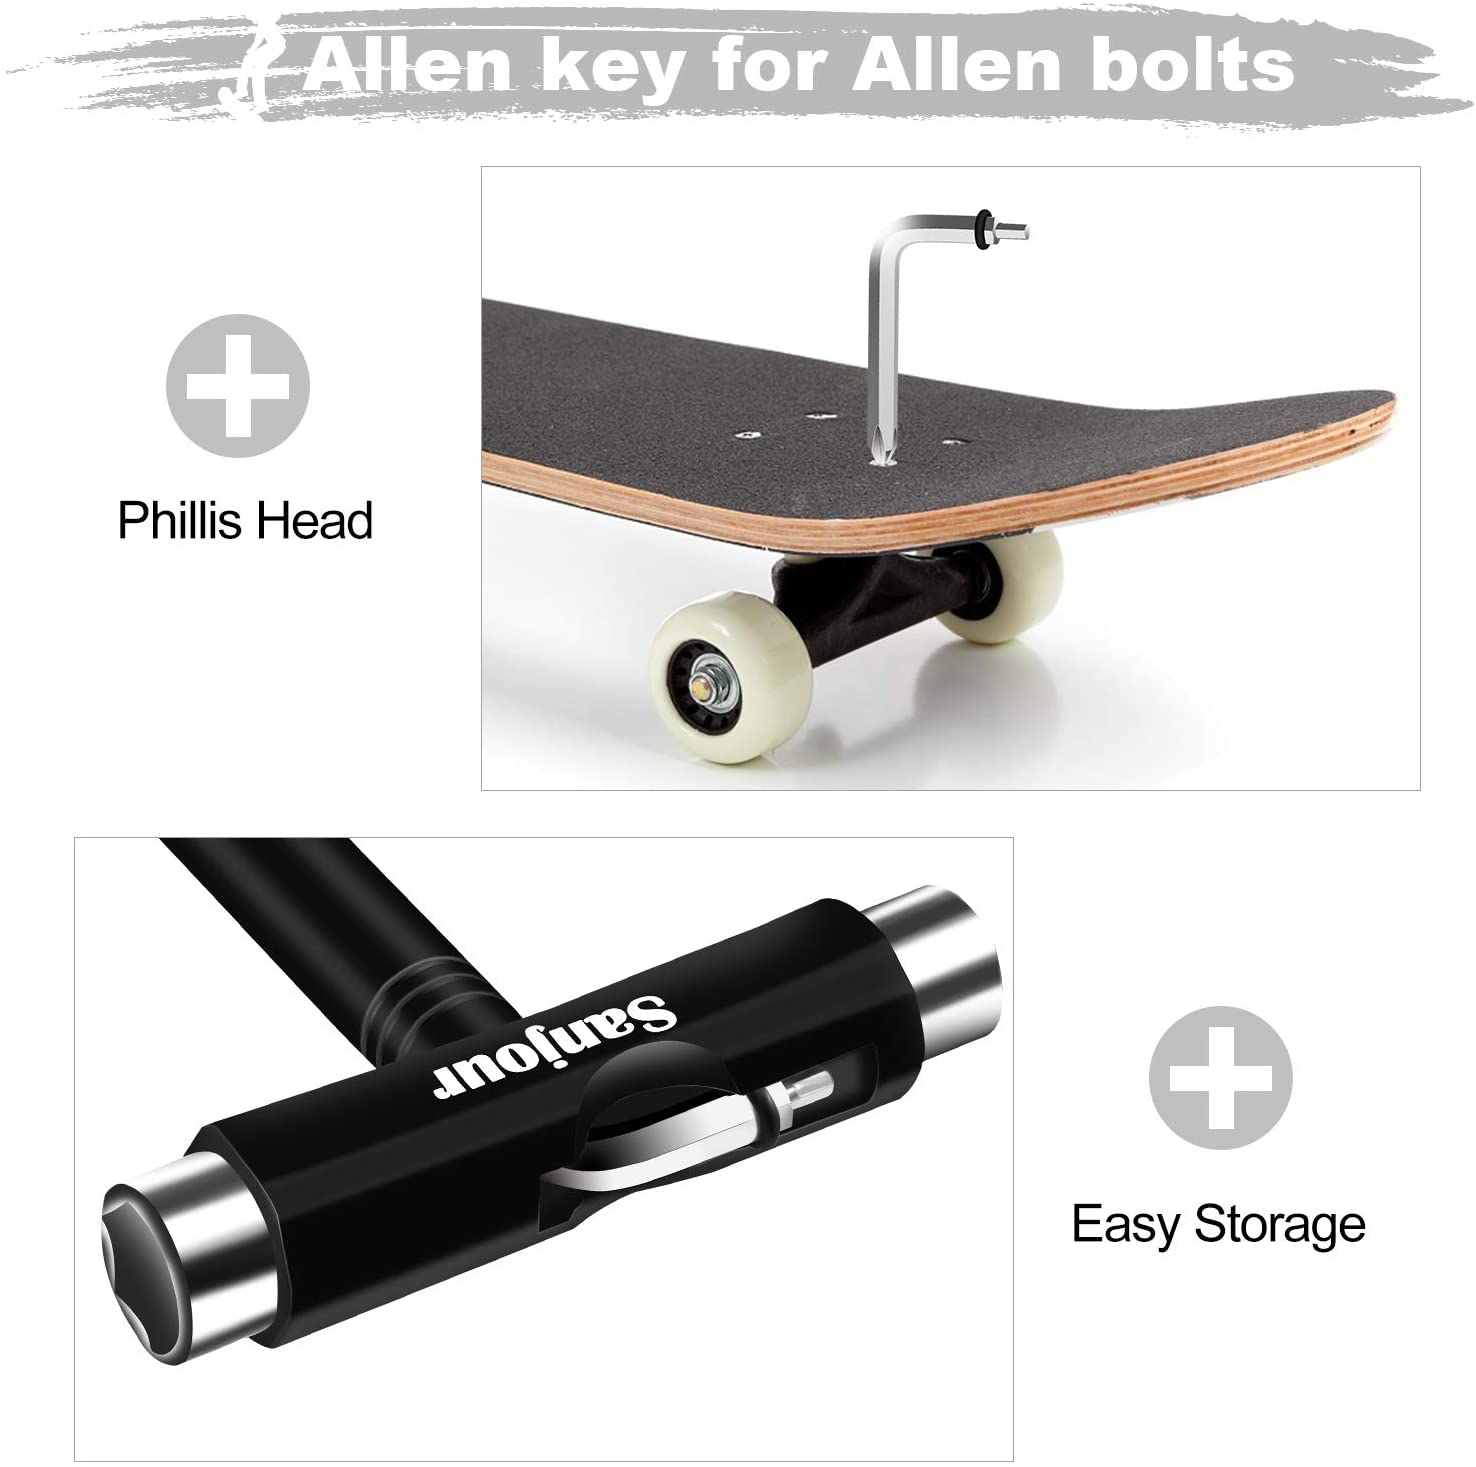 All-in-One Skate Tools Multi-Function Portable Skateboard T Tool Accessory with T-Type Allen Key and L-Type Phillips Head Wrench Screwdriver FISH SKATEBOARDS Skateboard Tool 